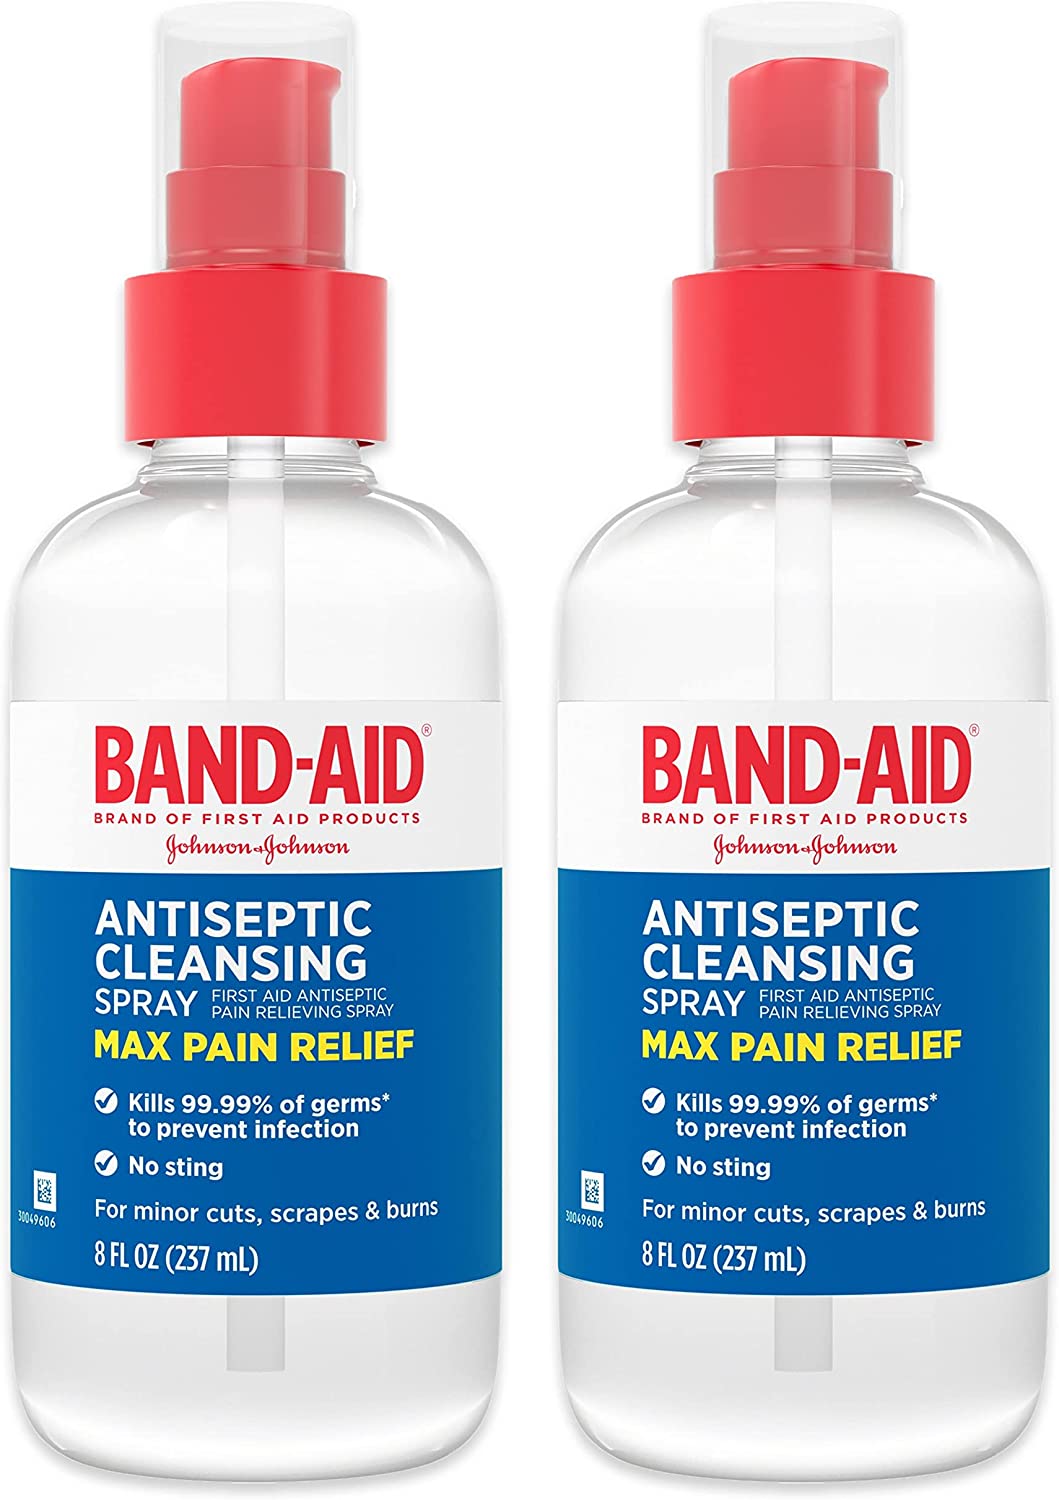 Band-Aid Brand Antiseptic Cleansing Spray, First Aid Antiseptic Spray Relieves Pain & Kill Germs, with Benzalkonium Cl Wound Antiseptic & Pramoxine HCl Topical Analgesic, 2 x 8 fl. oz